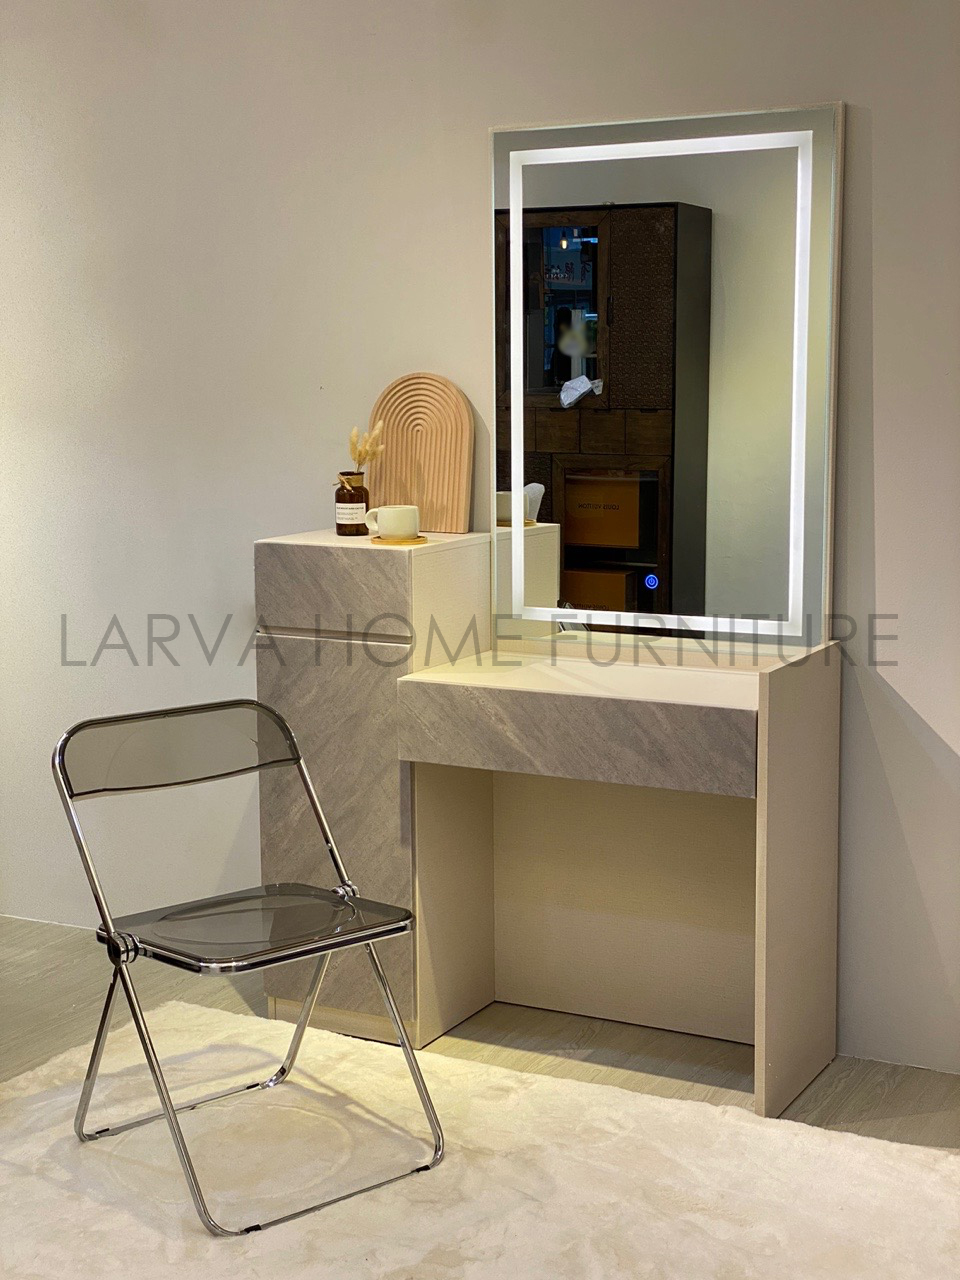 Harvey LED Dressing Table Perak, Malaysia, Ipoh Supplier, Suppliers,  Supply, Supplies | Larva Home Furniture Sdn Bhd